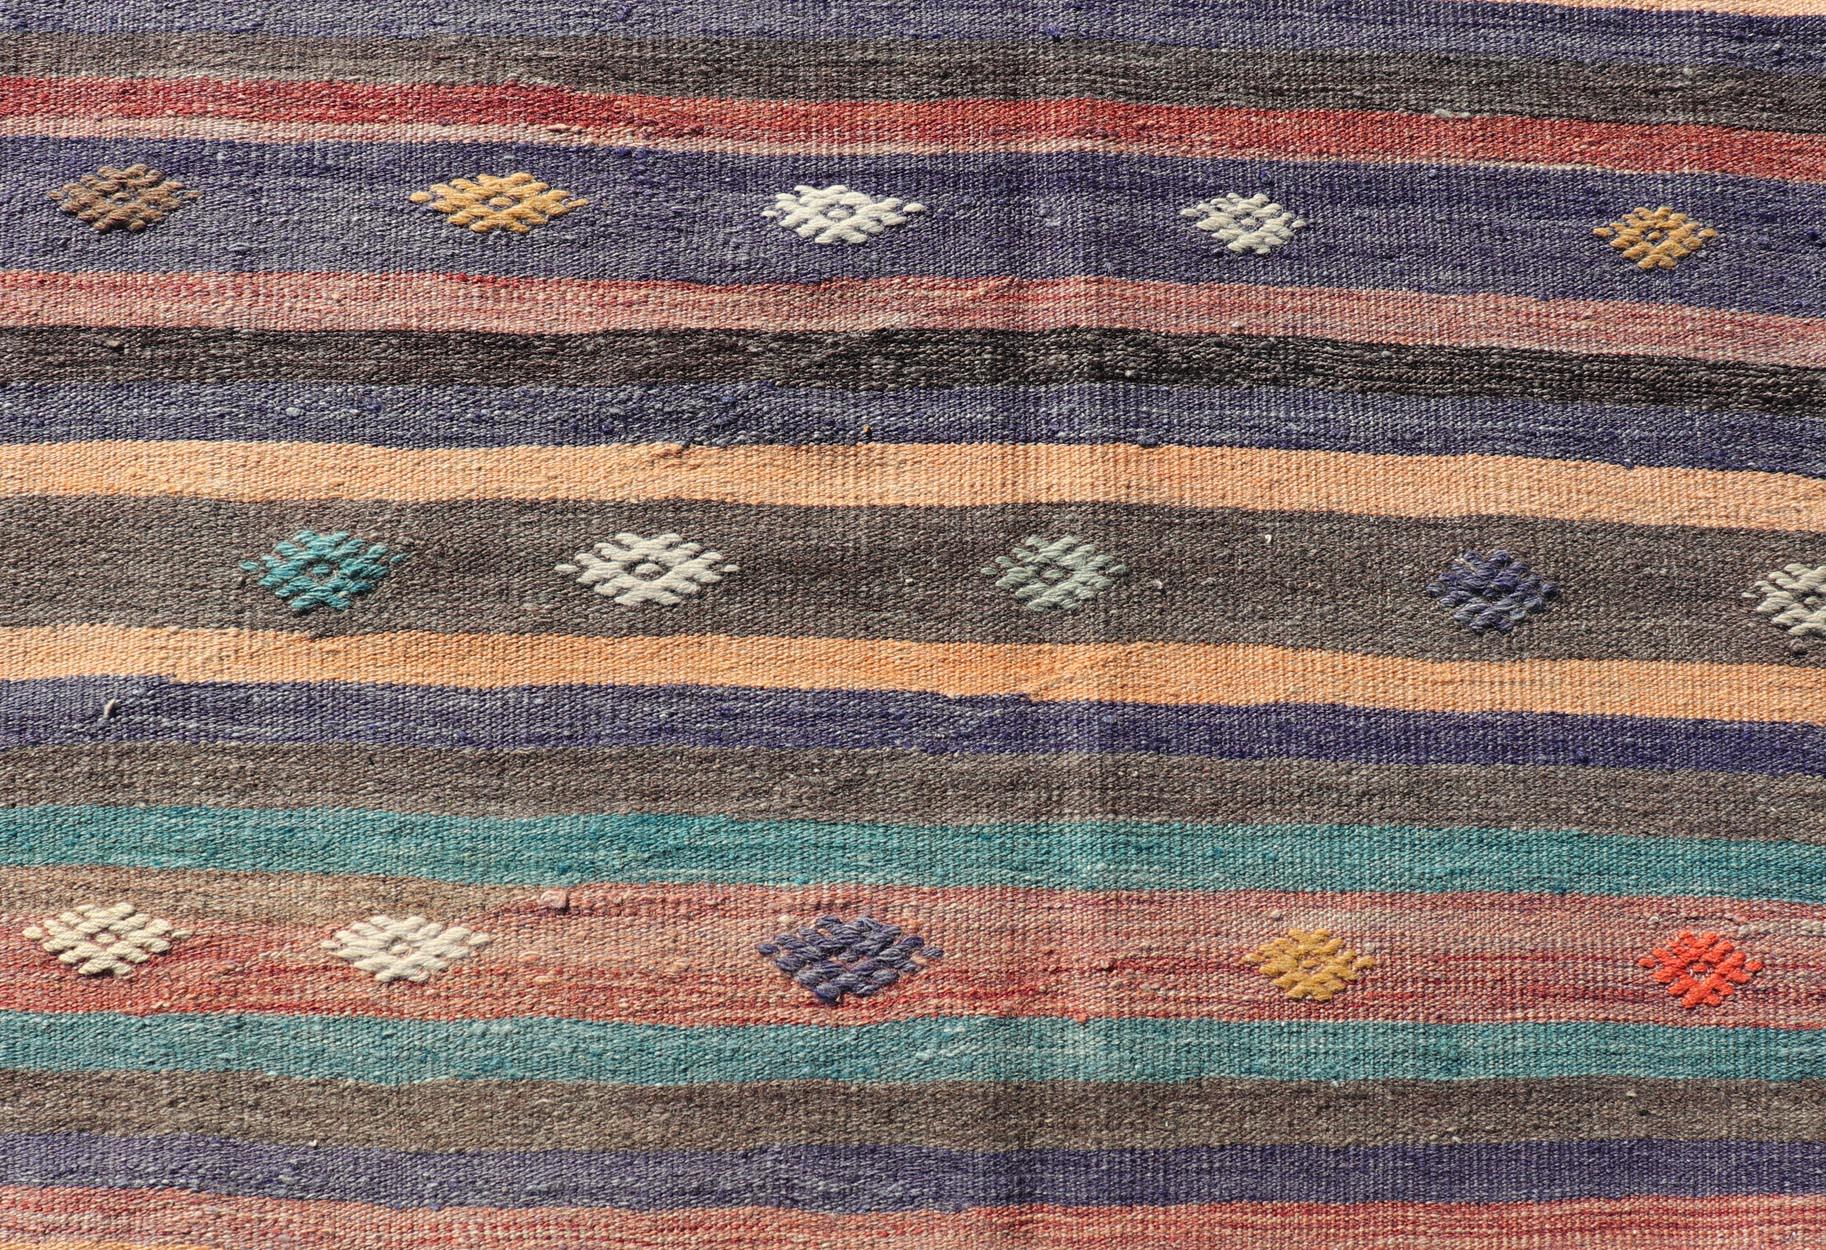 Measures: 3'3 x 10'10 
Colorful vintage embroidered Kilim Runner with Stripe's and Geometric. Keivan Woven Arts / rug TU-NED-5003, country of origin / type: Turkey / Kilim, circa 1950

This vintage Kilim displays an array of designs, including a